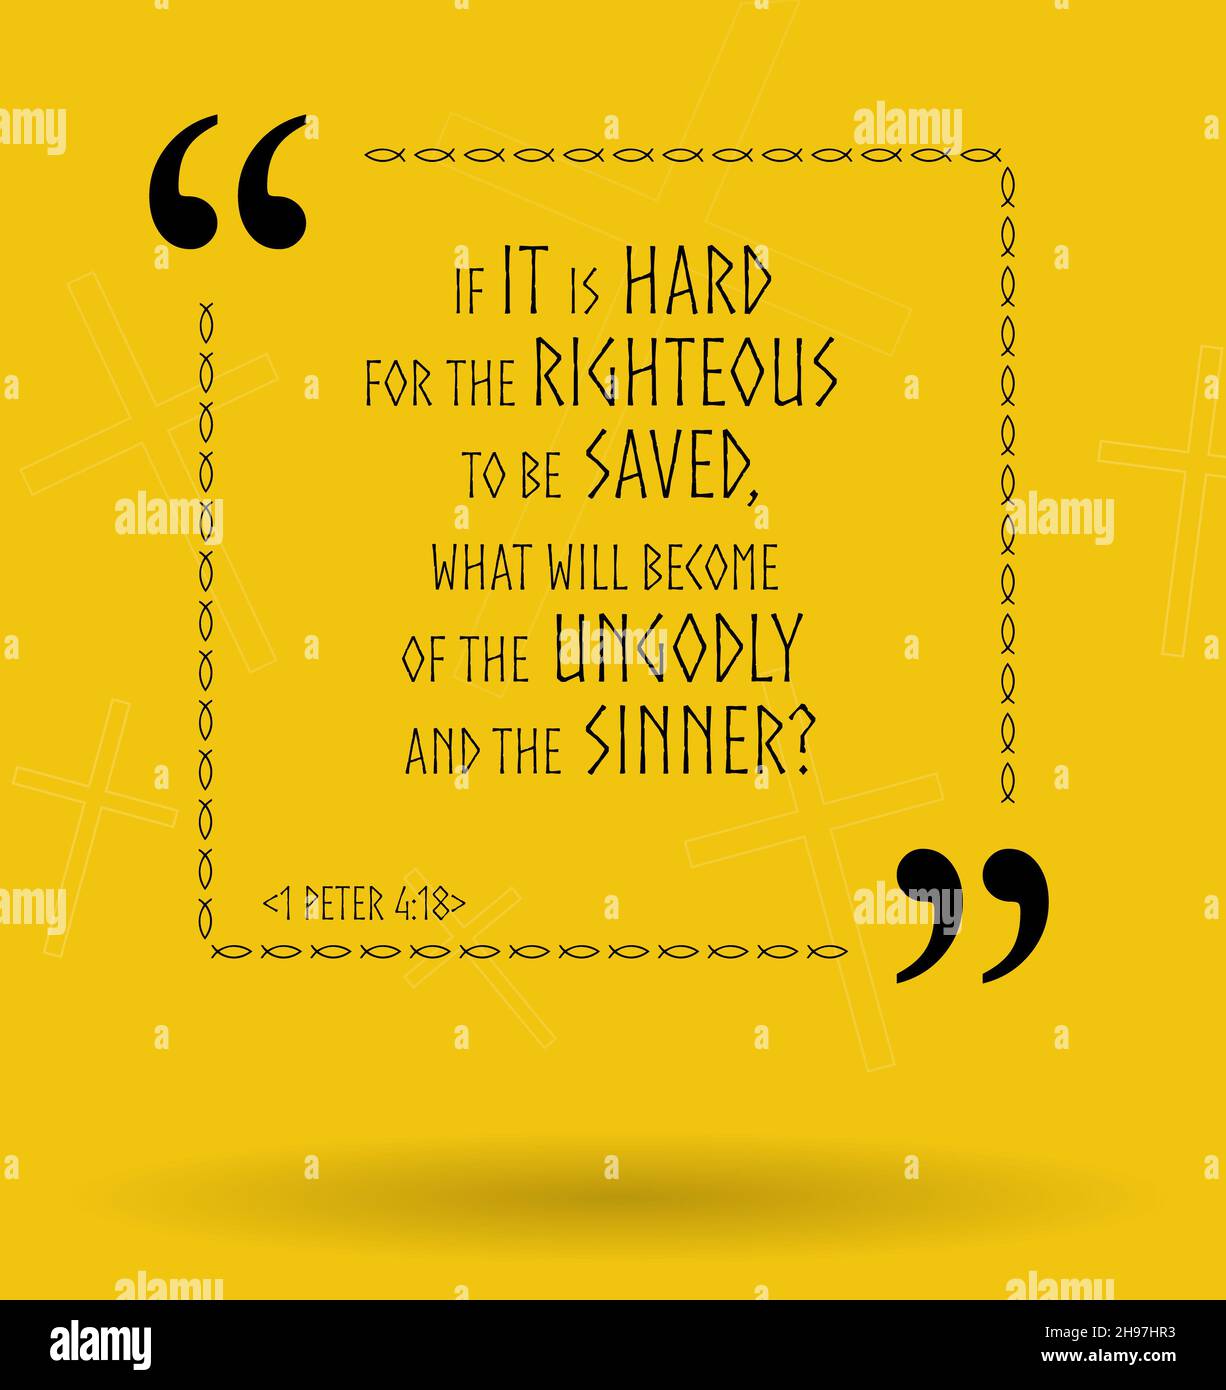 Best Bible quotes about righteous people and sinners. Christian sayings for Bible studies, colourful illustration Stock Photo